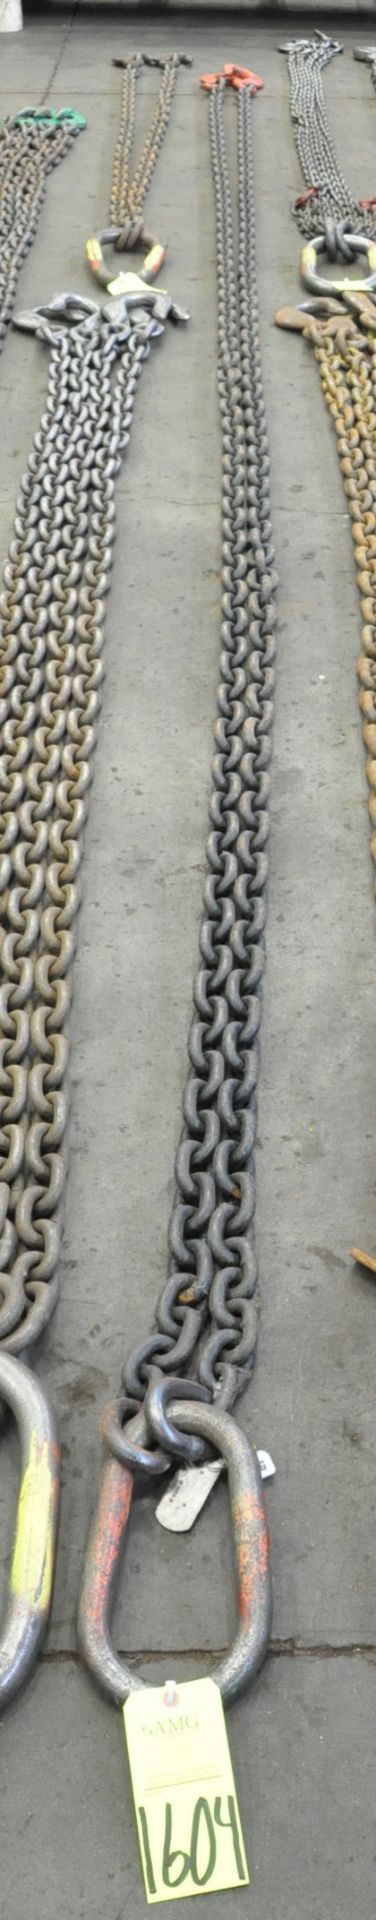 5/8" Link x 18' 6" Long 2-Hook Chain Sling, Cert Tag, (G-23), (Yellow Tag)